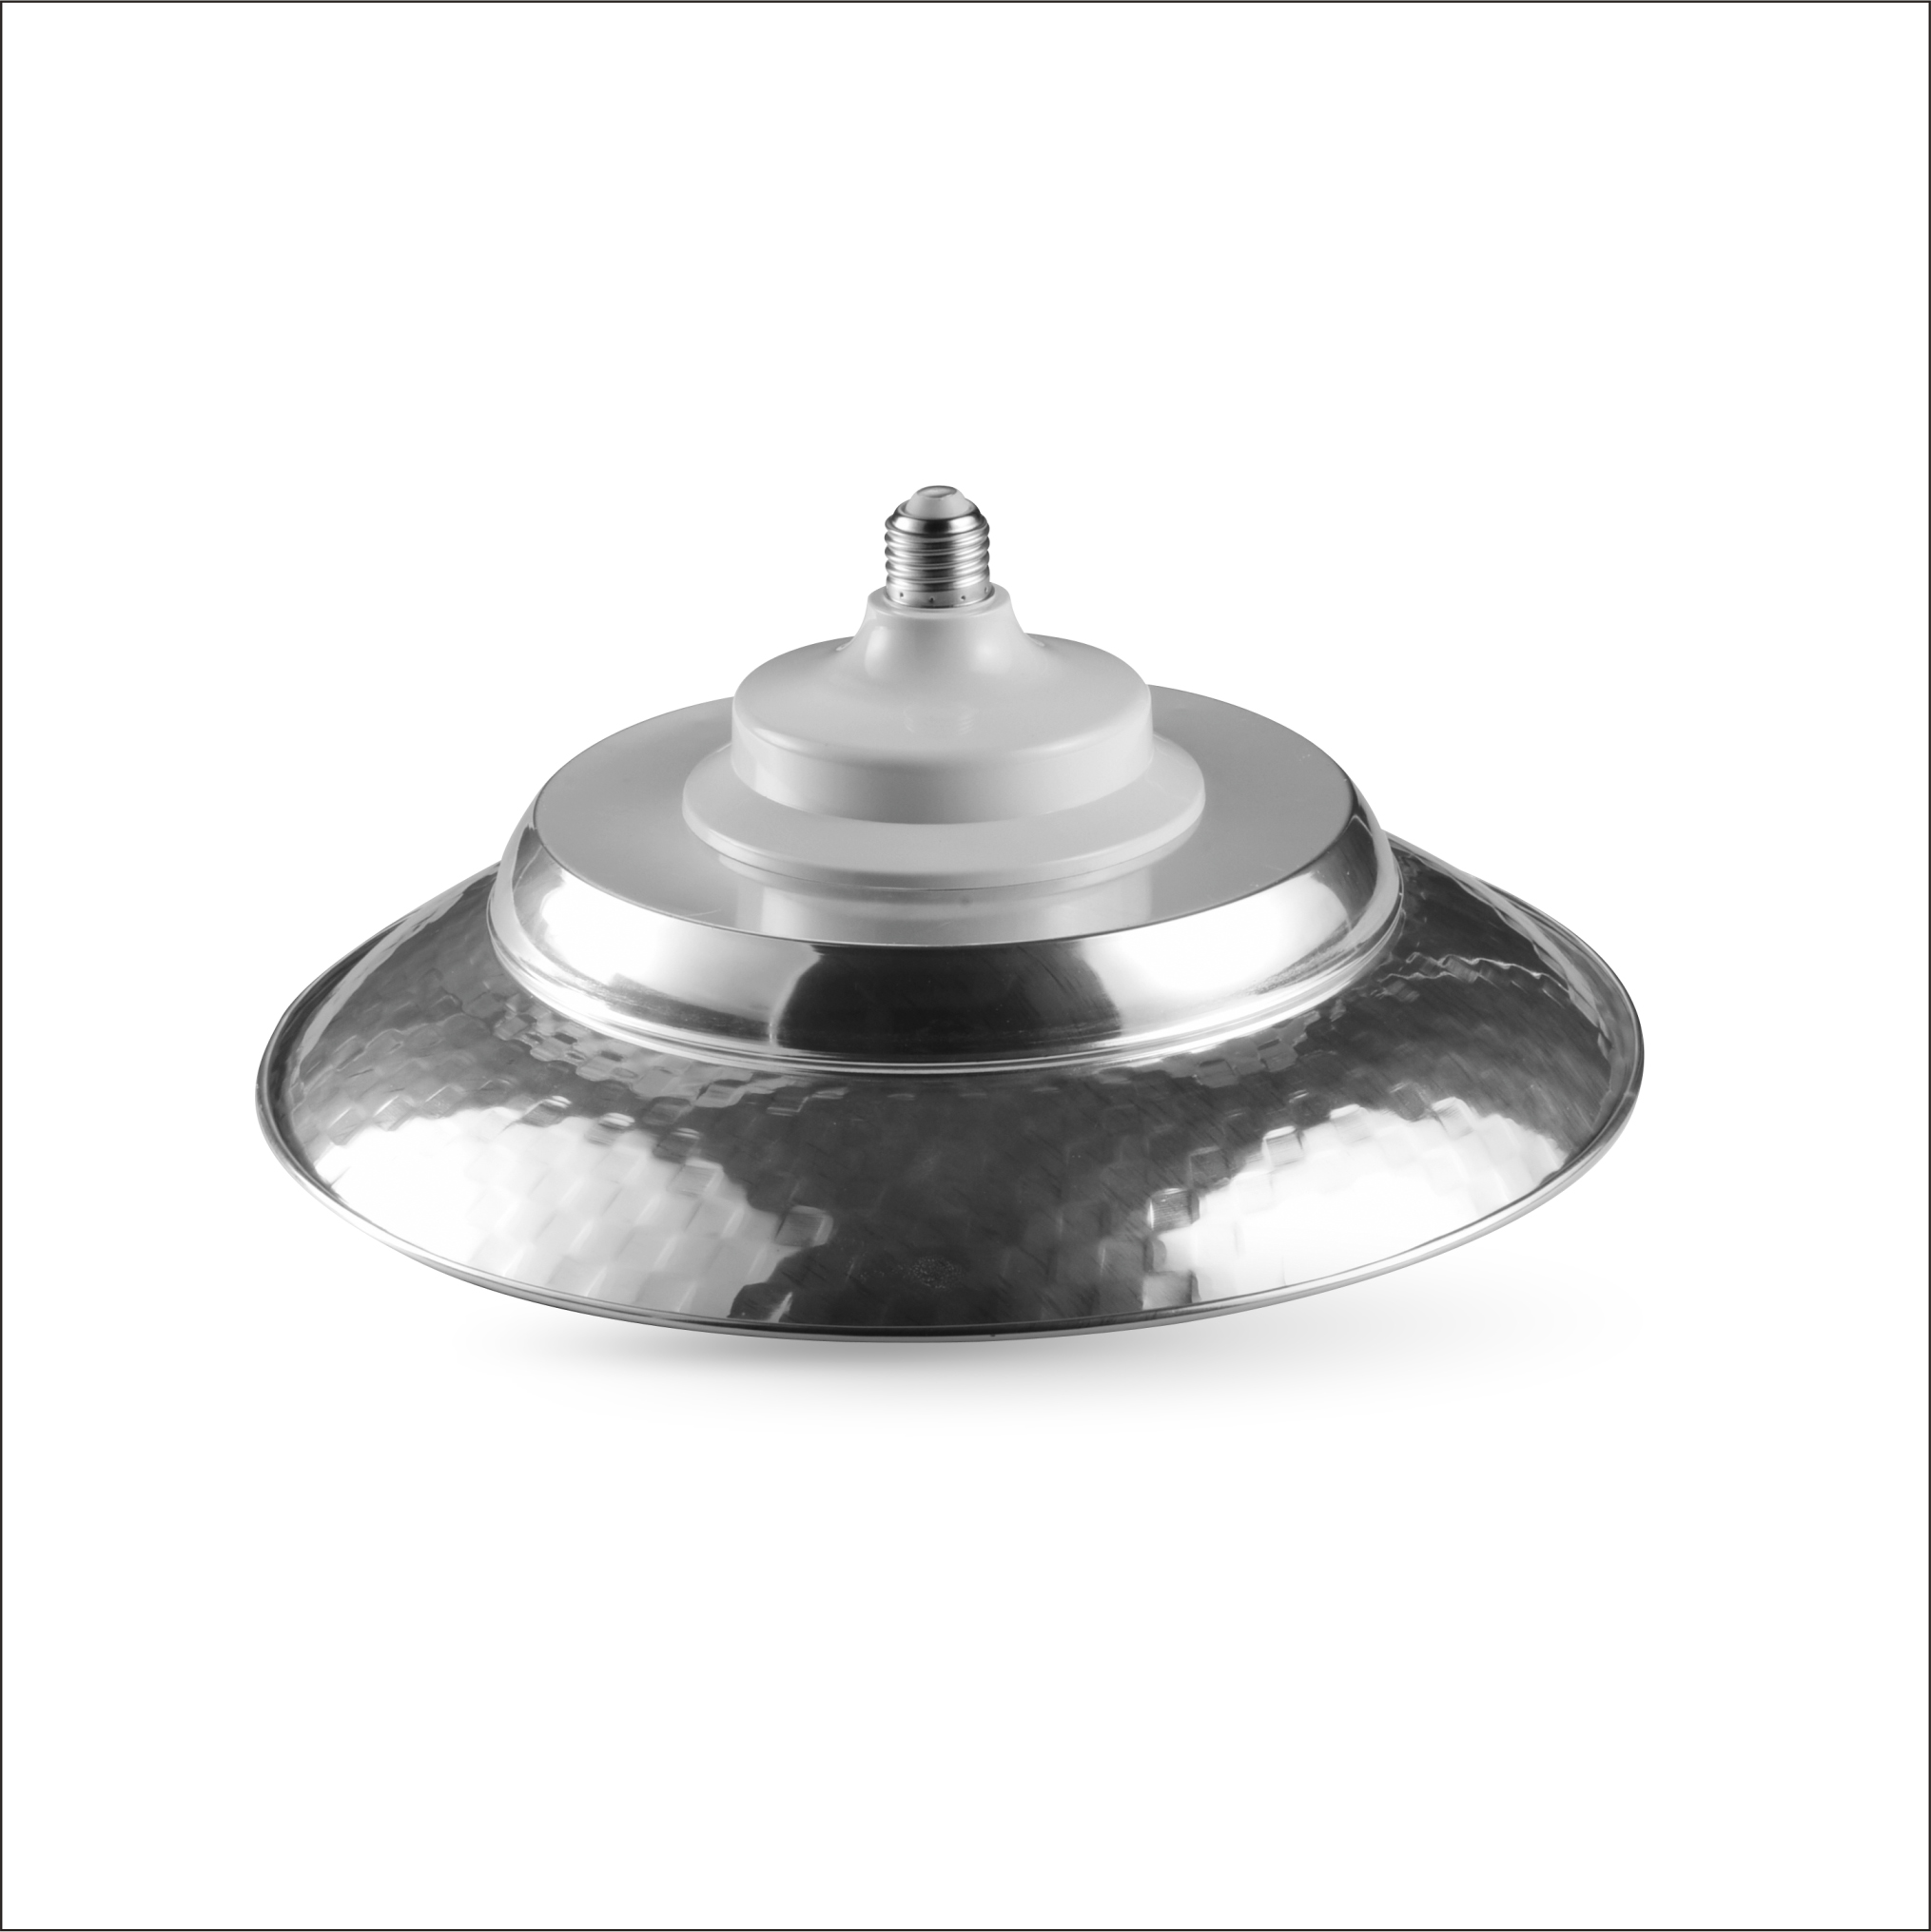 Tri-proof flying saucer mining lamp